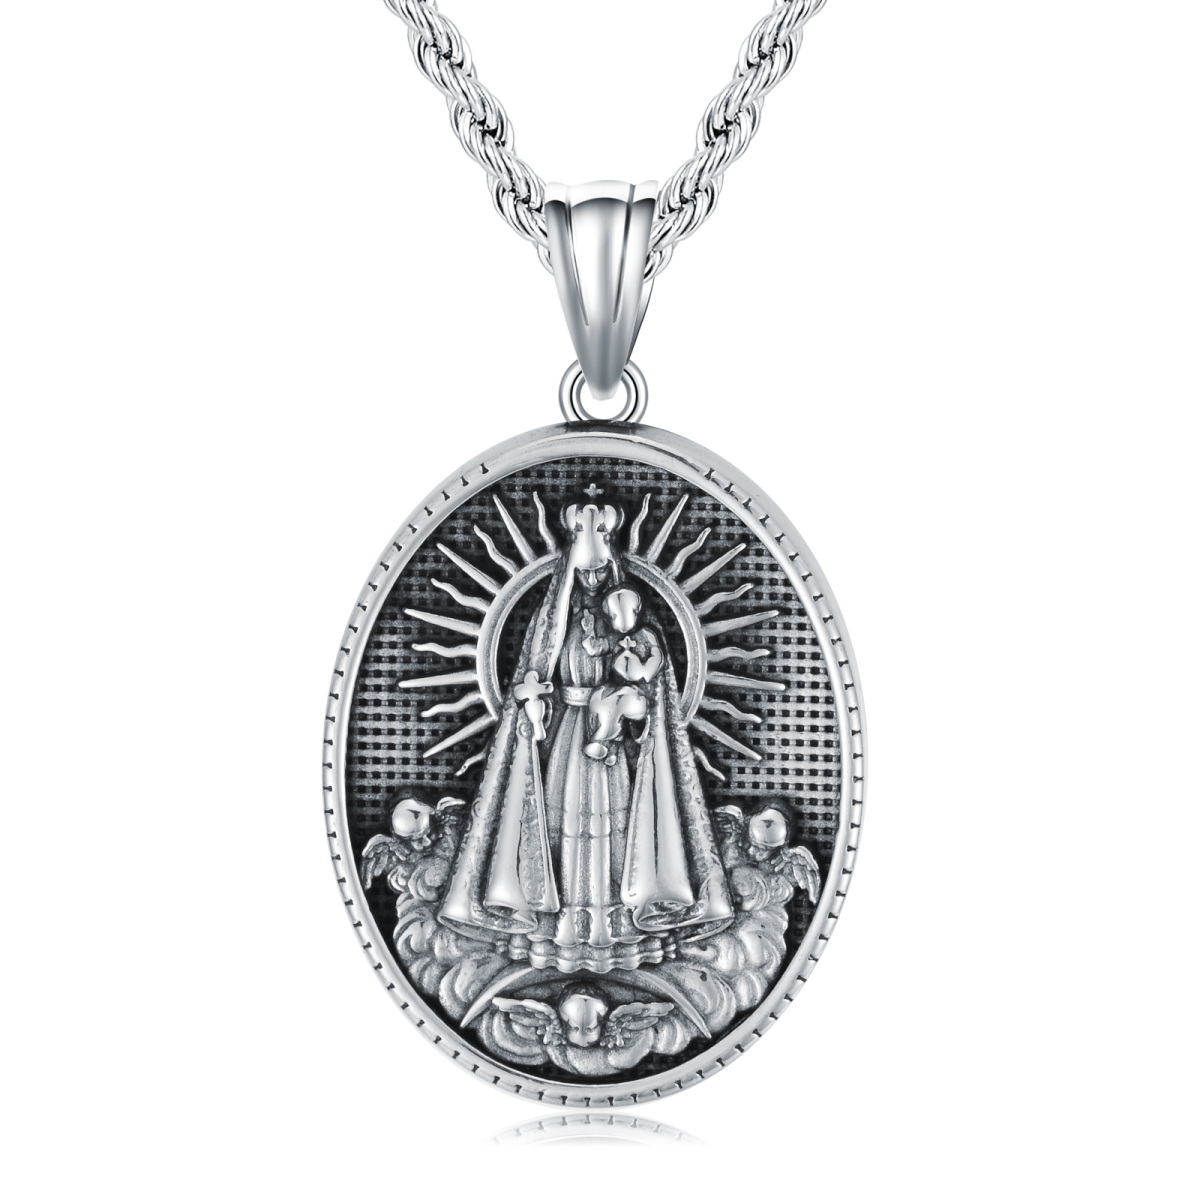 Stainless Steel with Retro Silver Plated Oval Shaped Virgin Mary Pendant Necklace for Men-1